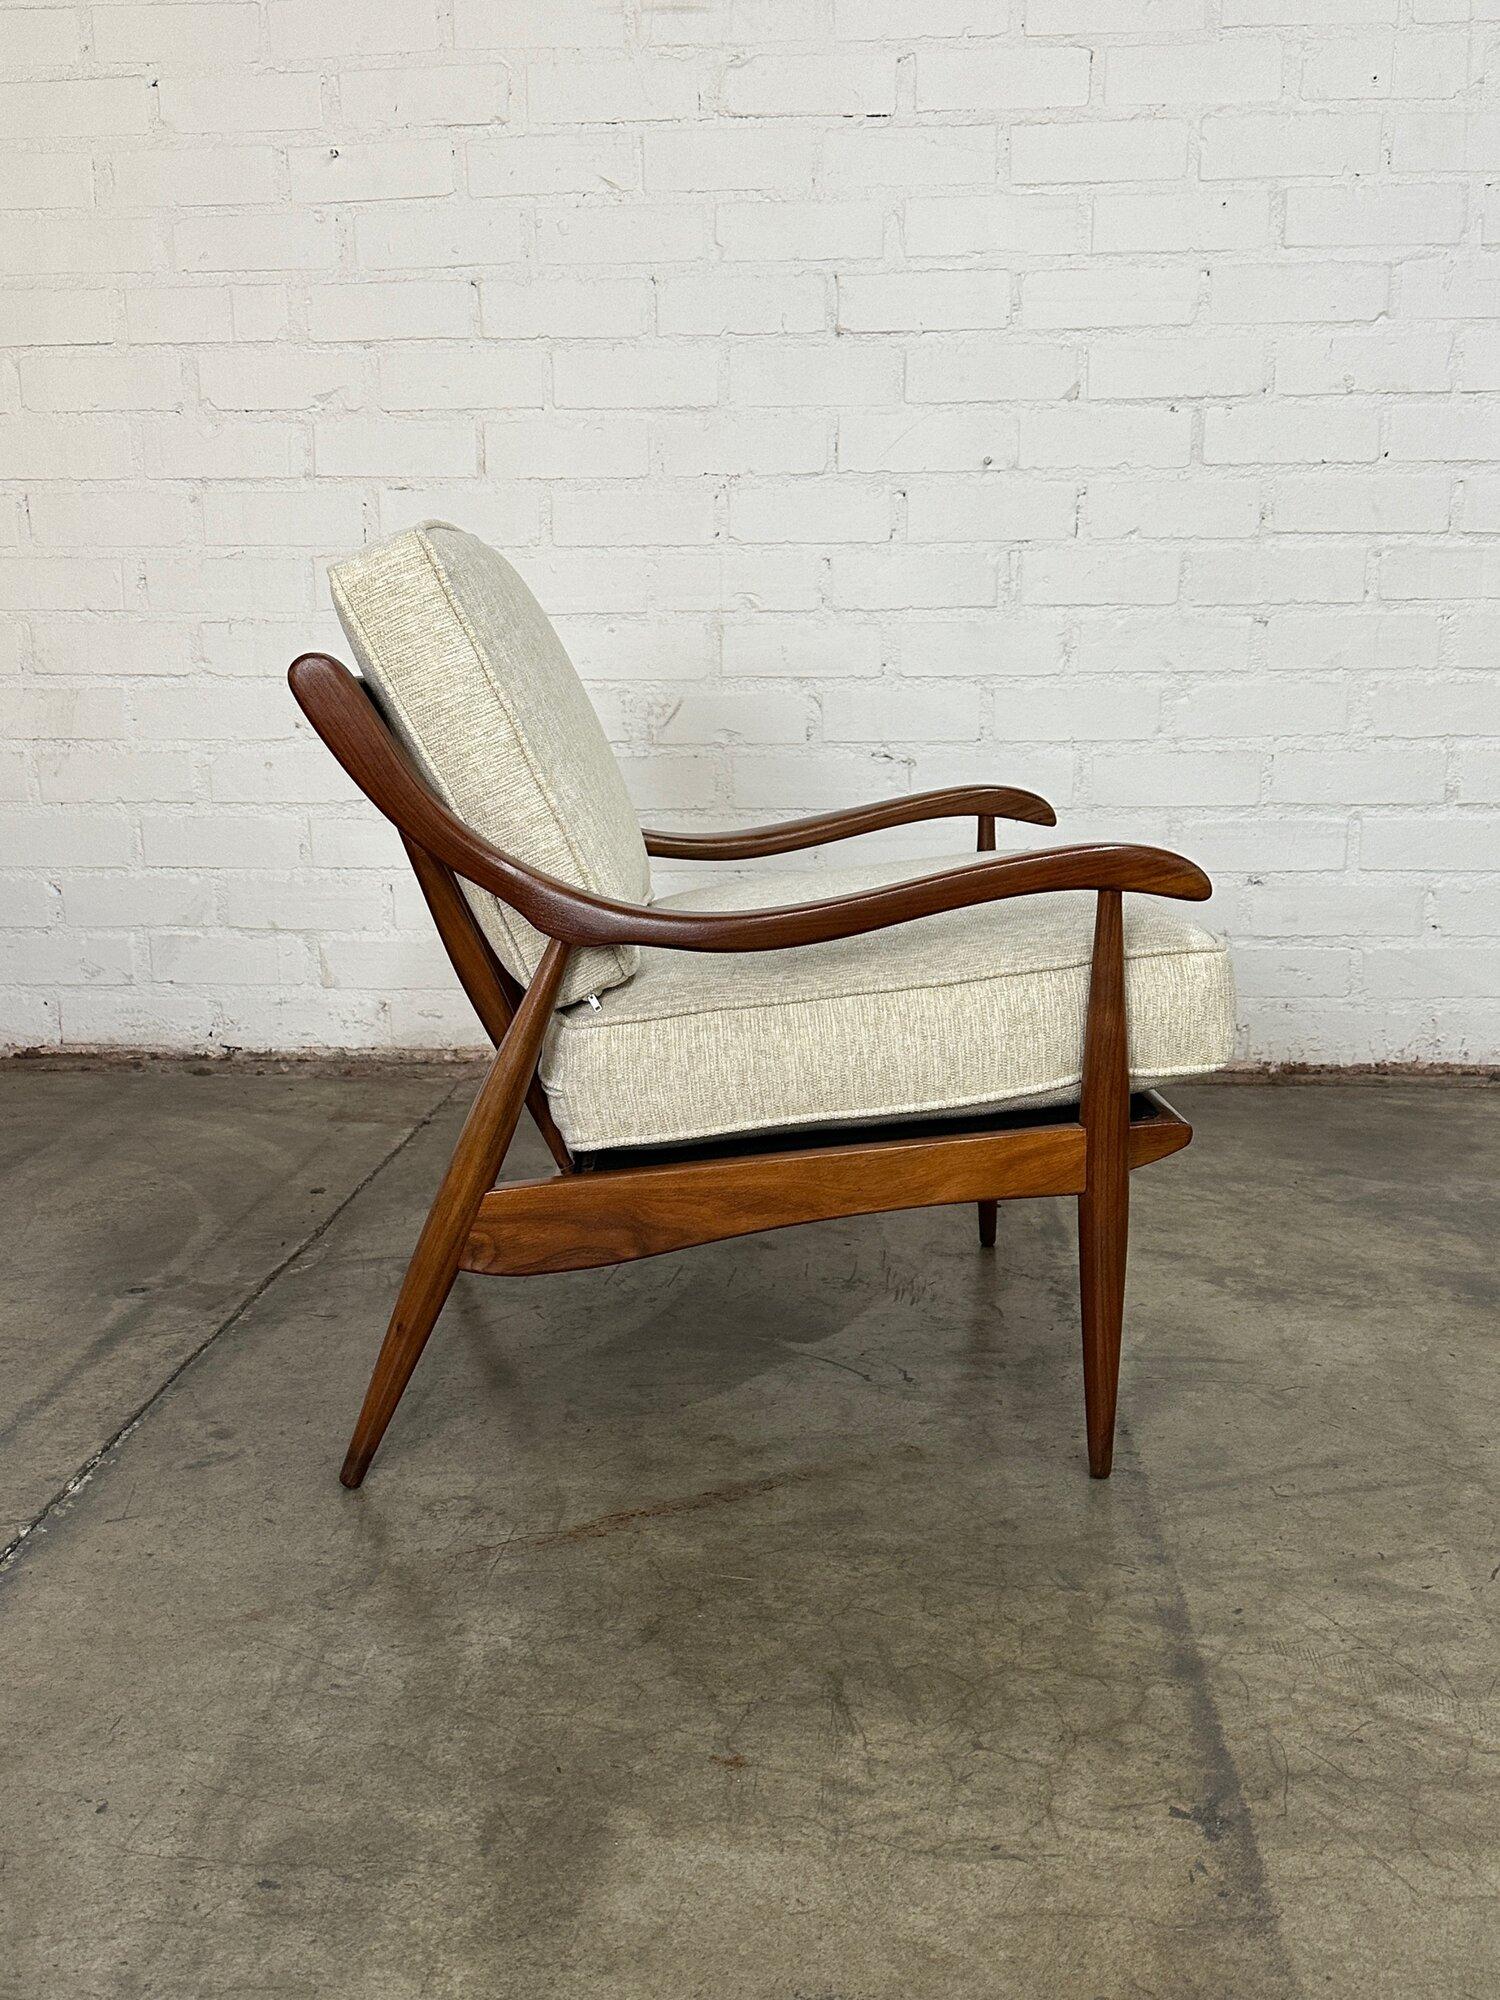 W26 D30 H30 SW22 SD19 SH19 AH21

Circa 1950s solid wood lounge chair restored using walnut brown stain to even the tone throughout and a glossy sealer. The seats have been redone is a woven cream and sand fabric. The seats are comfortable and firm